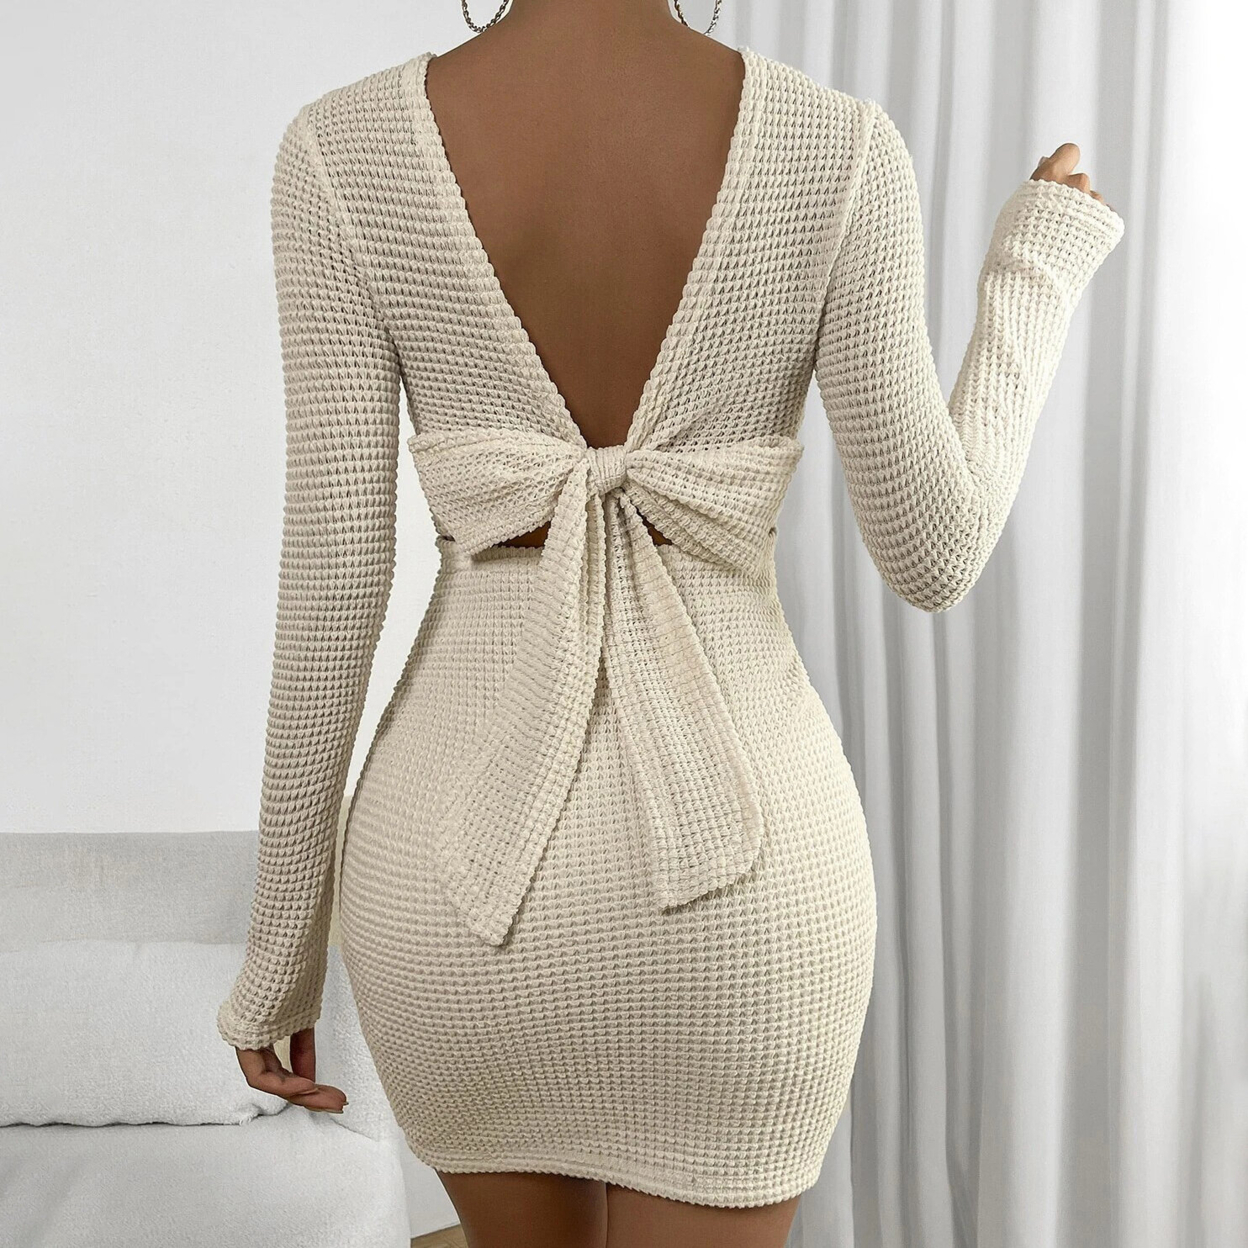 Tied Backless Bodycon Dress - X-Small(2)